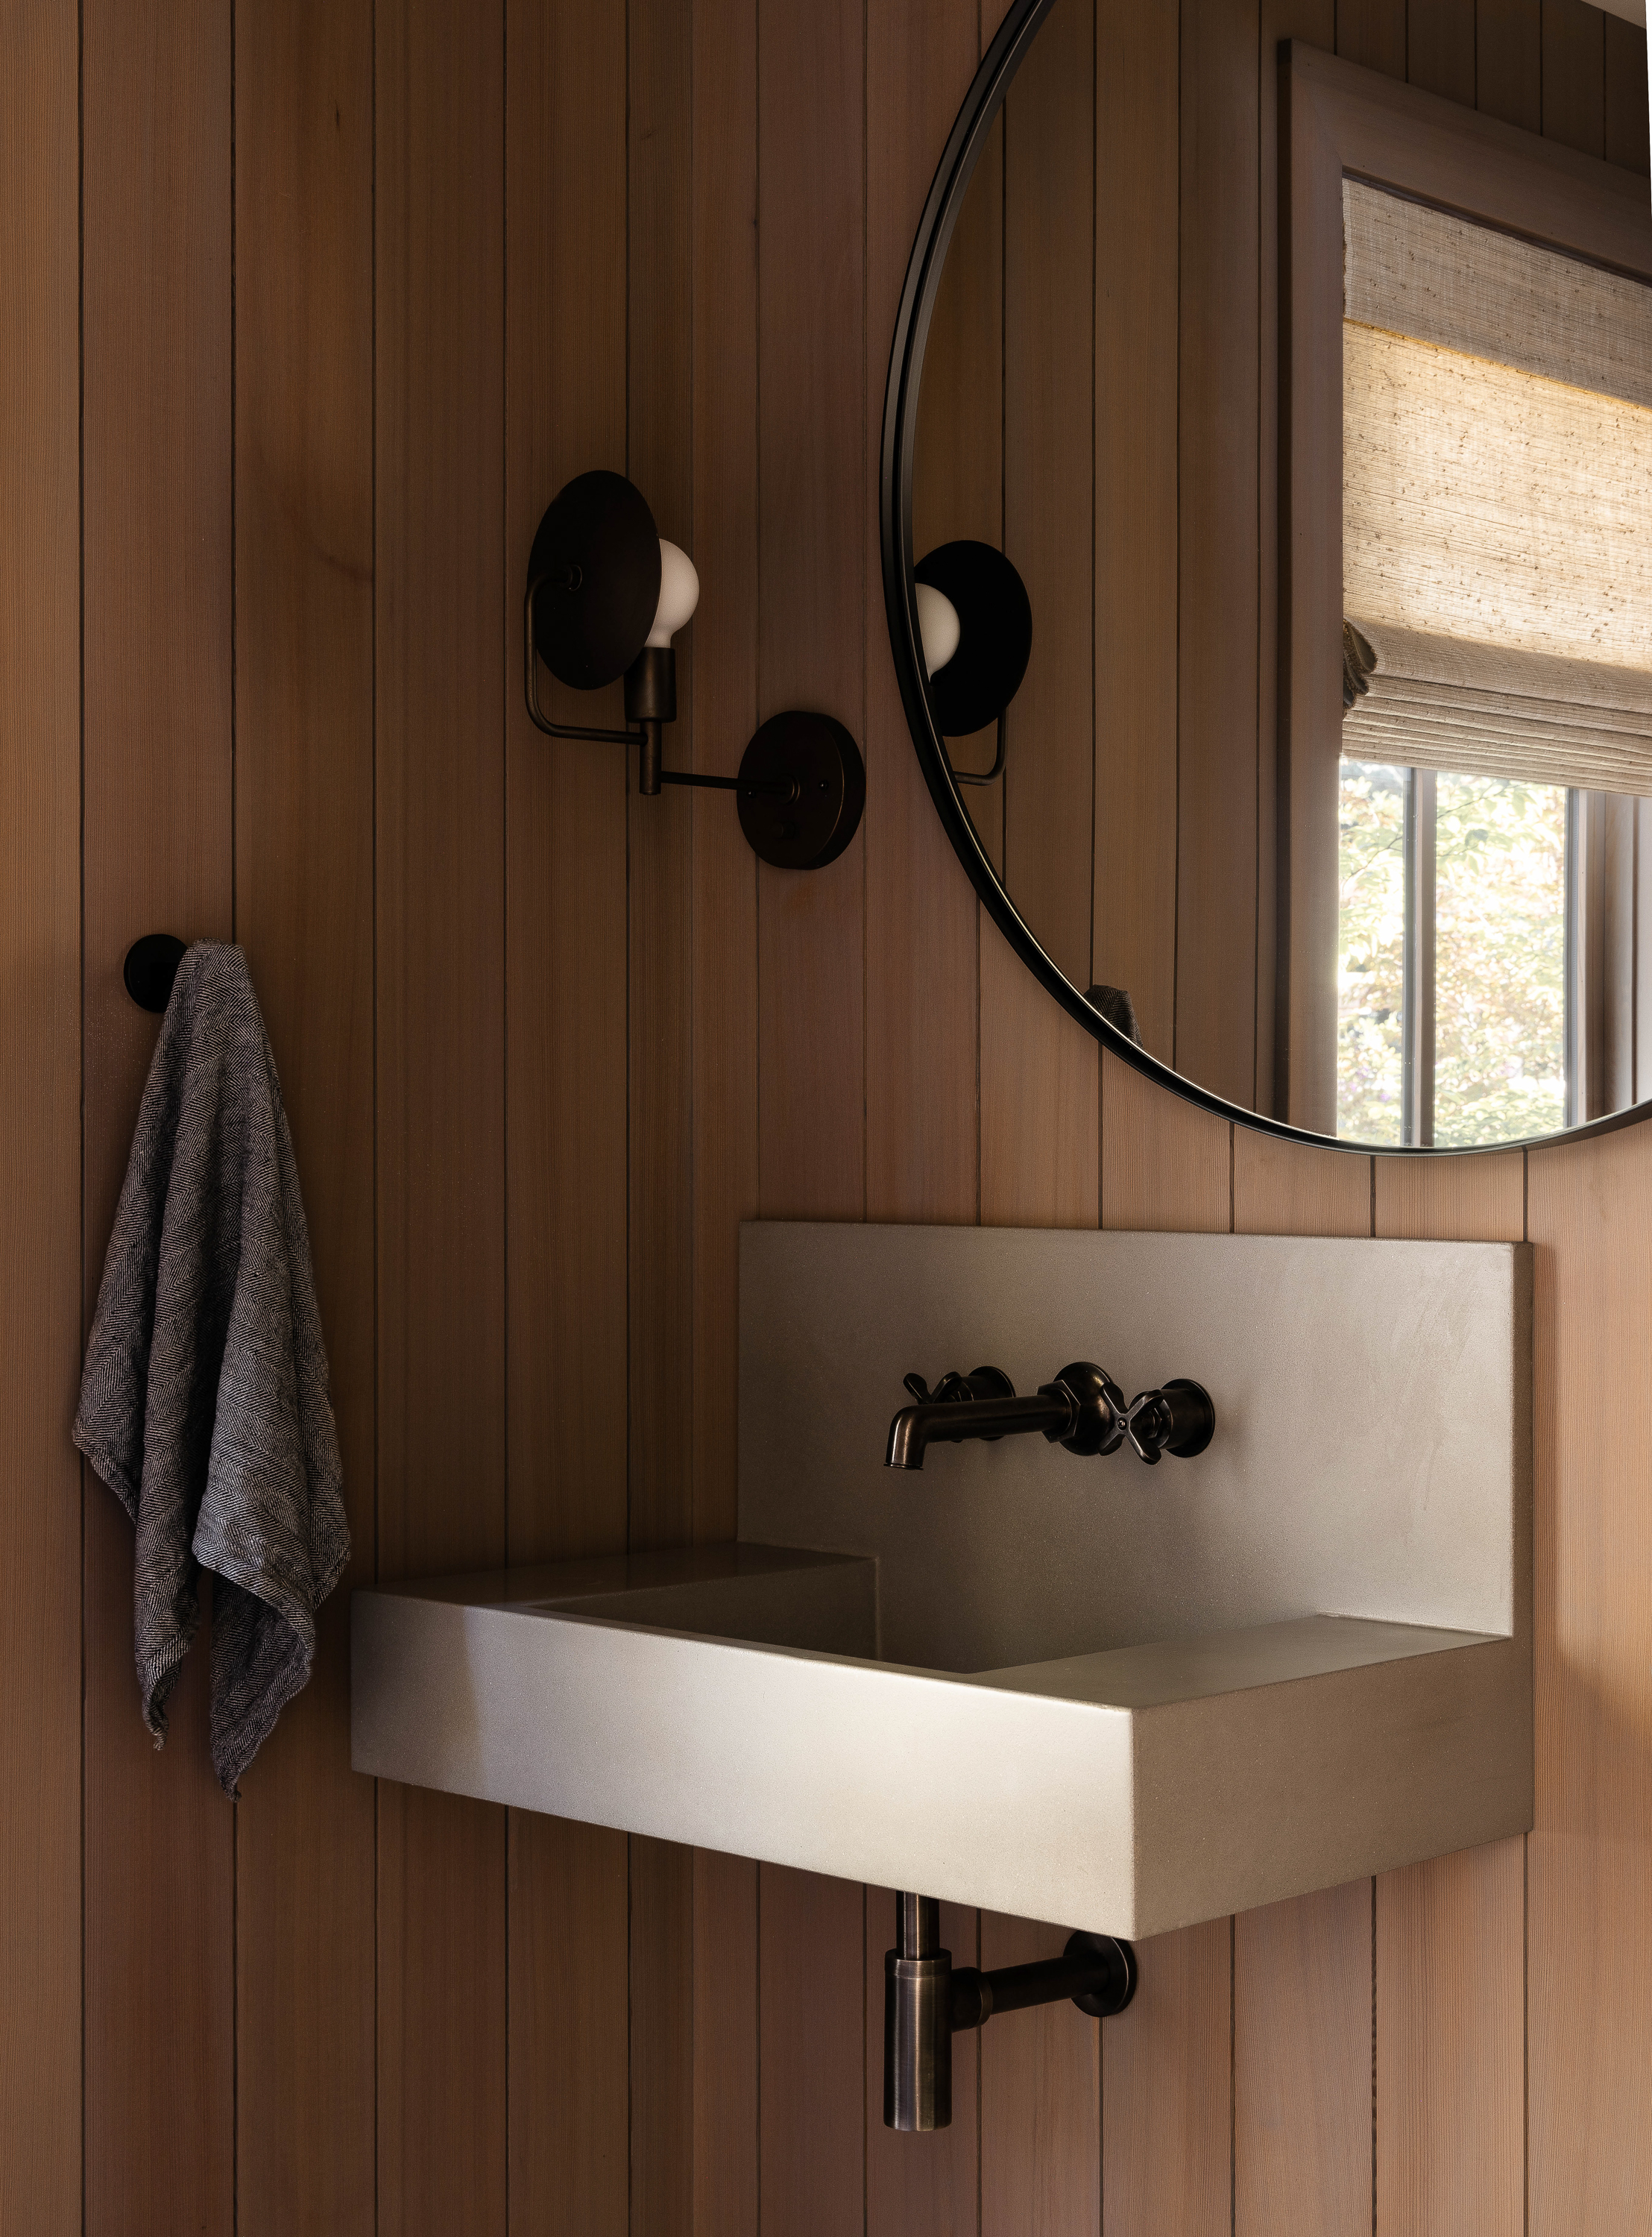 A close-up of the materials in the powder room reveals a honed concrete sink paired with light-stained vertical wood paneling and oil-rubbed bronze finishes, creating a modern yet warm ambiance.